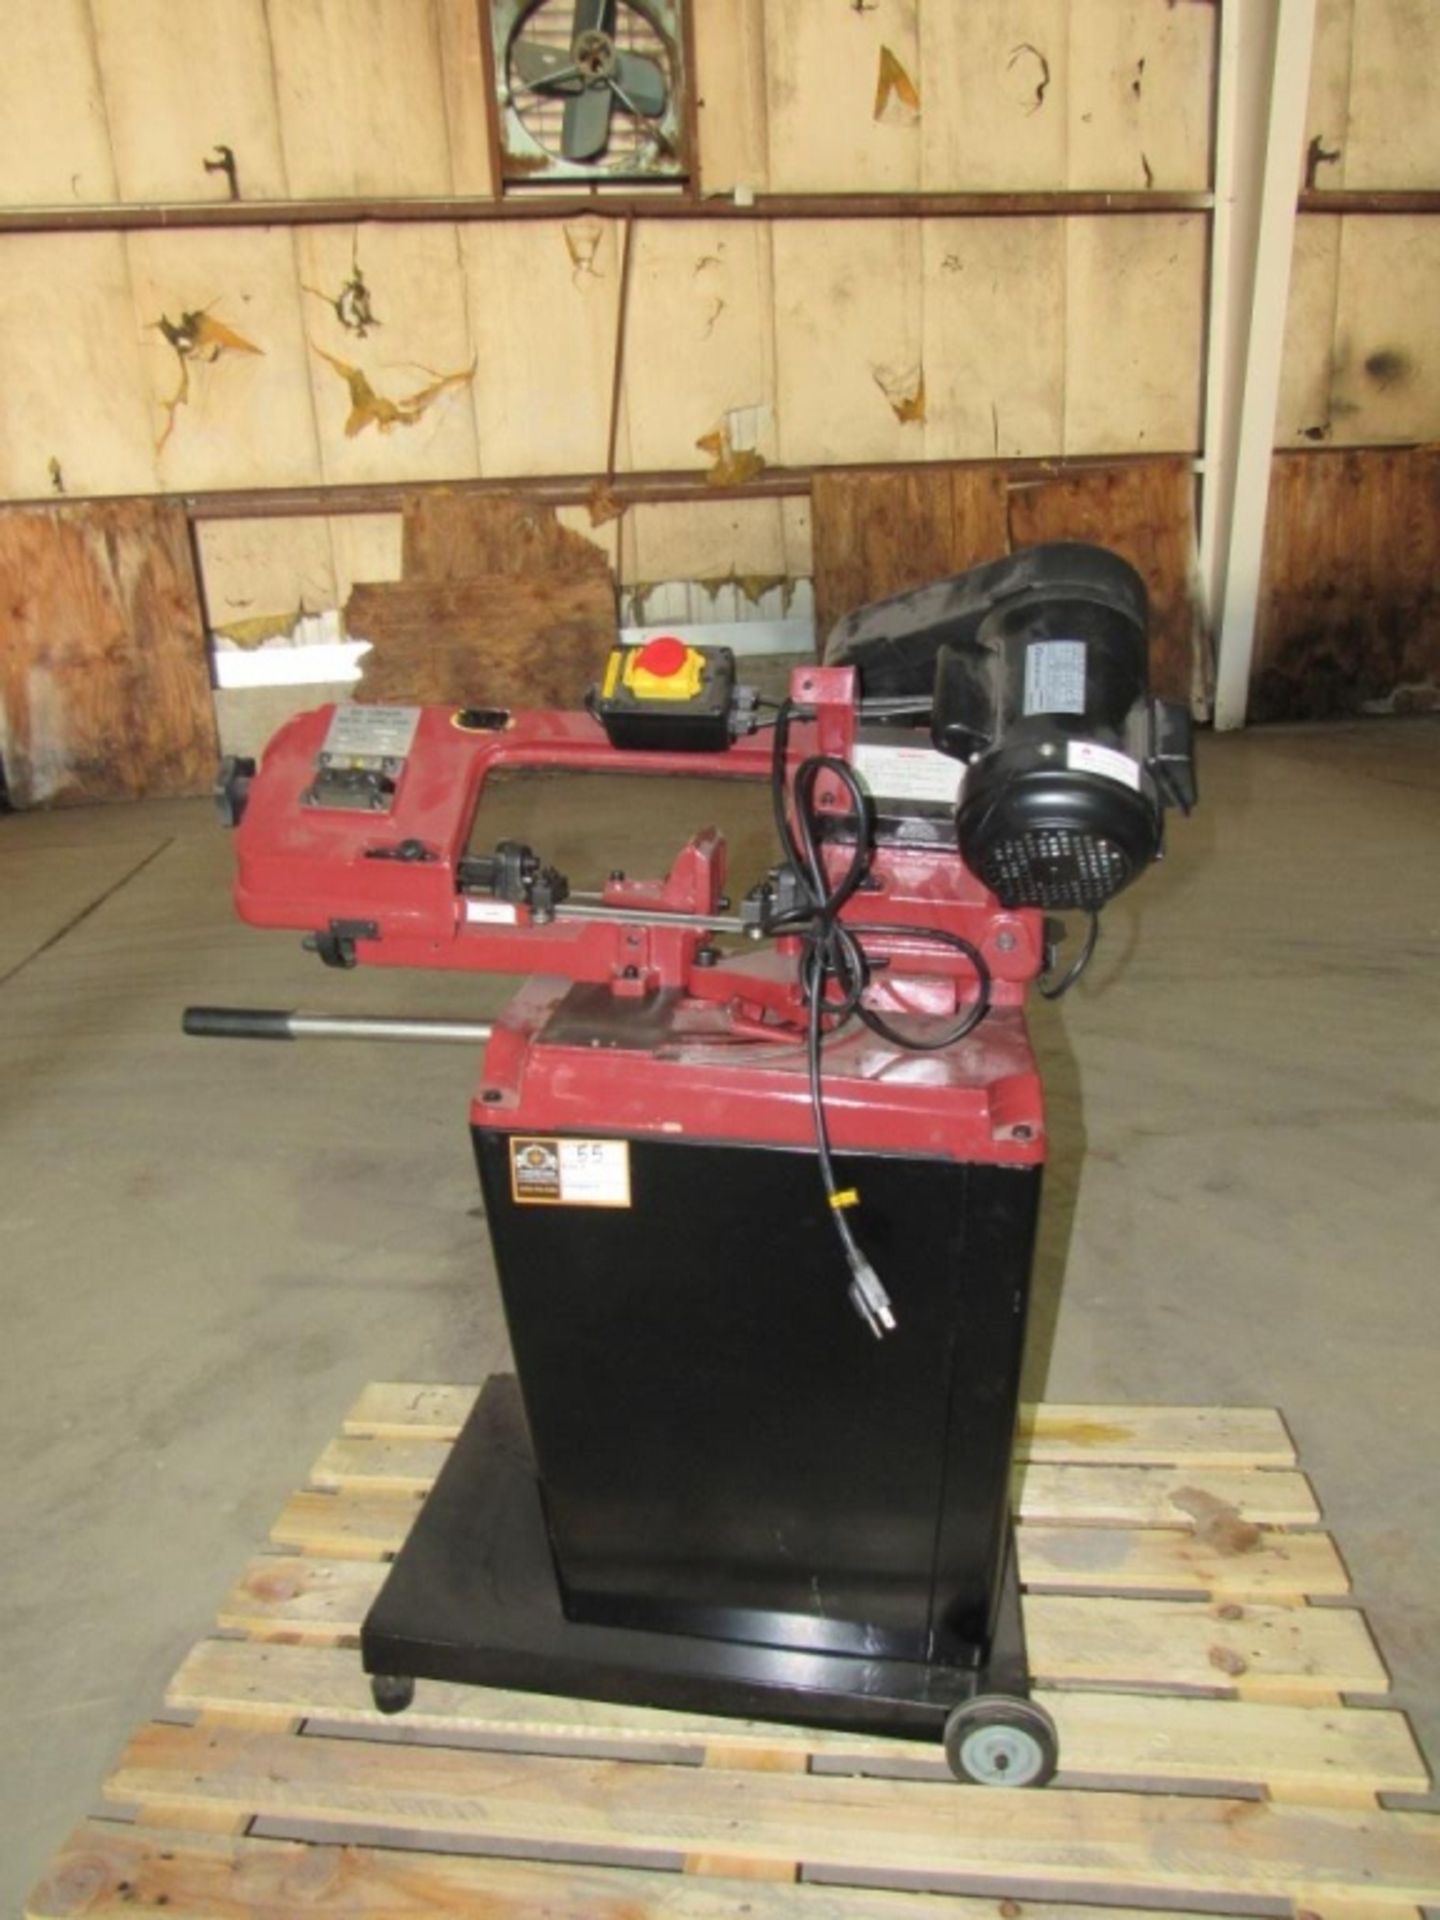 Metal Band Saw- Model - BS-128HDR 0.37 Kw 115 Volts 1 Phase 60 Hz Overall Dimensions - 3' x 20" x